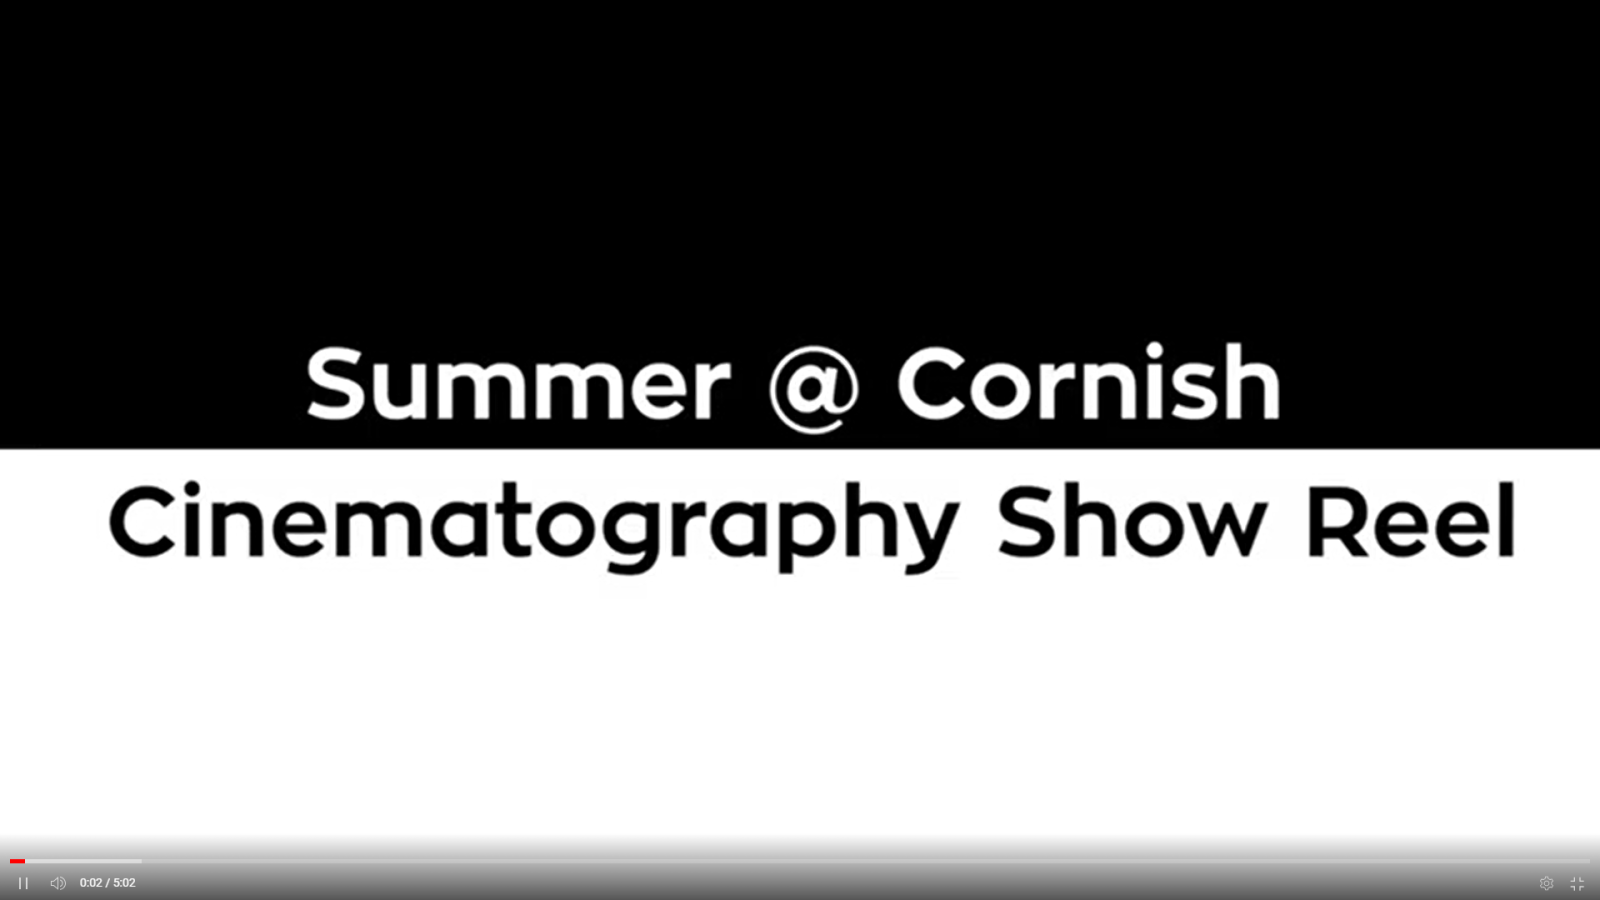 Black and White Header with Text "Summer@Cornish Cinematography Show Reel"